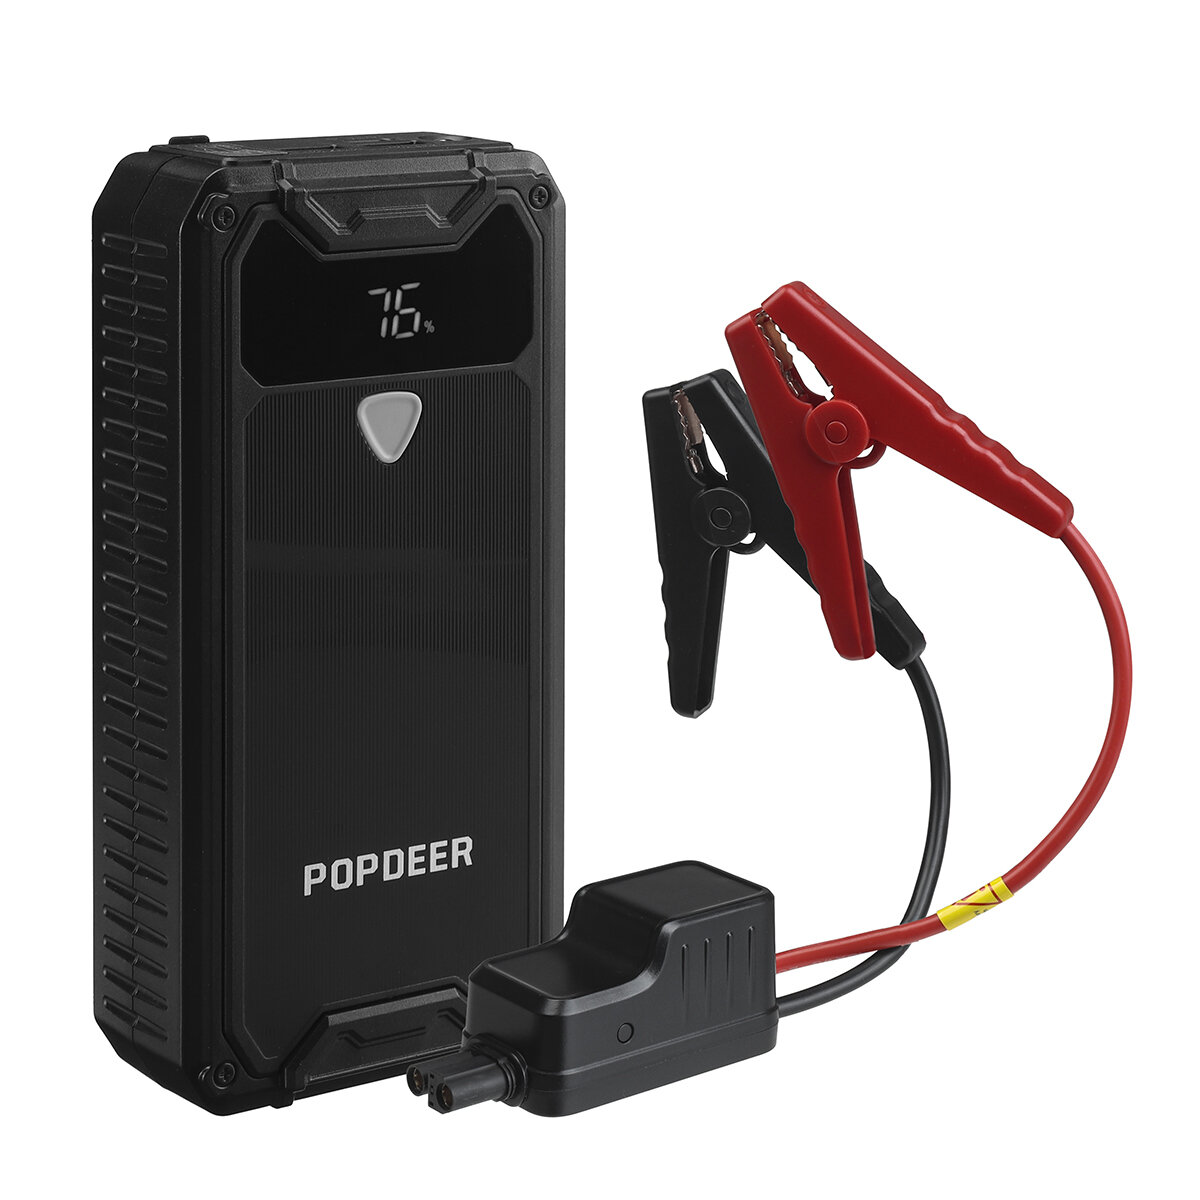 Image of POPDEER PD-JX1 1500A 15000mAh Portable Car Jump Starter with LED Flashlight Powerbank Emergency Power Supply